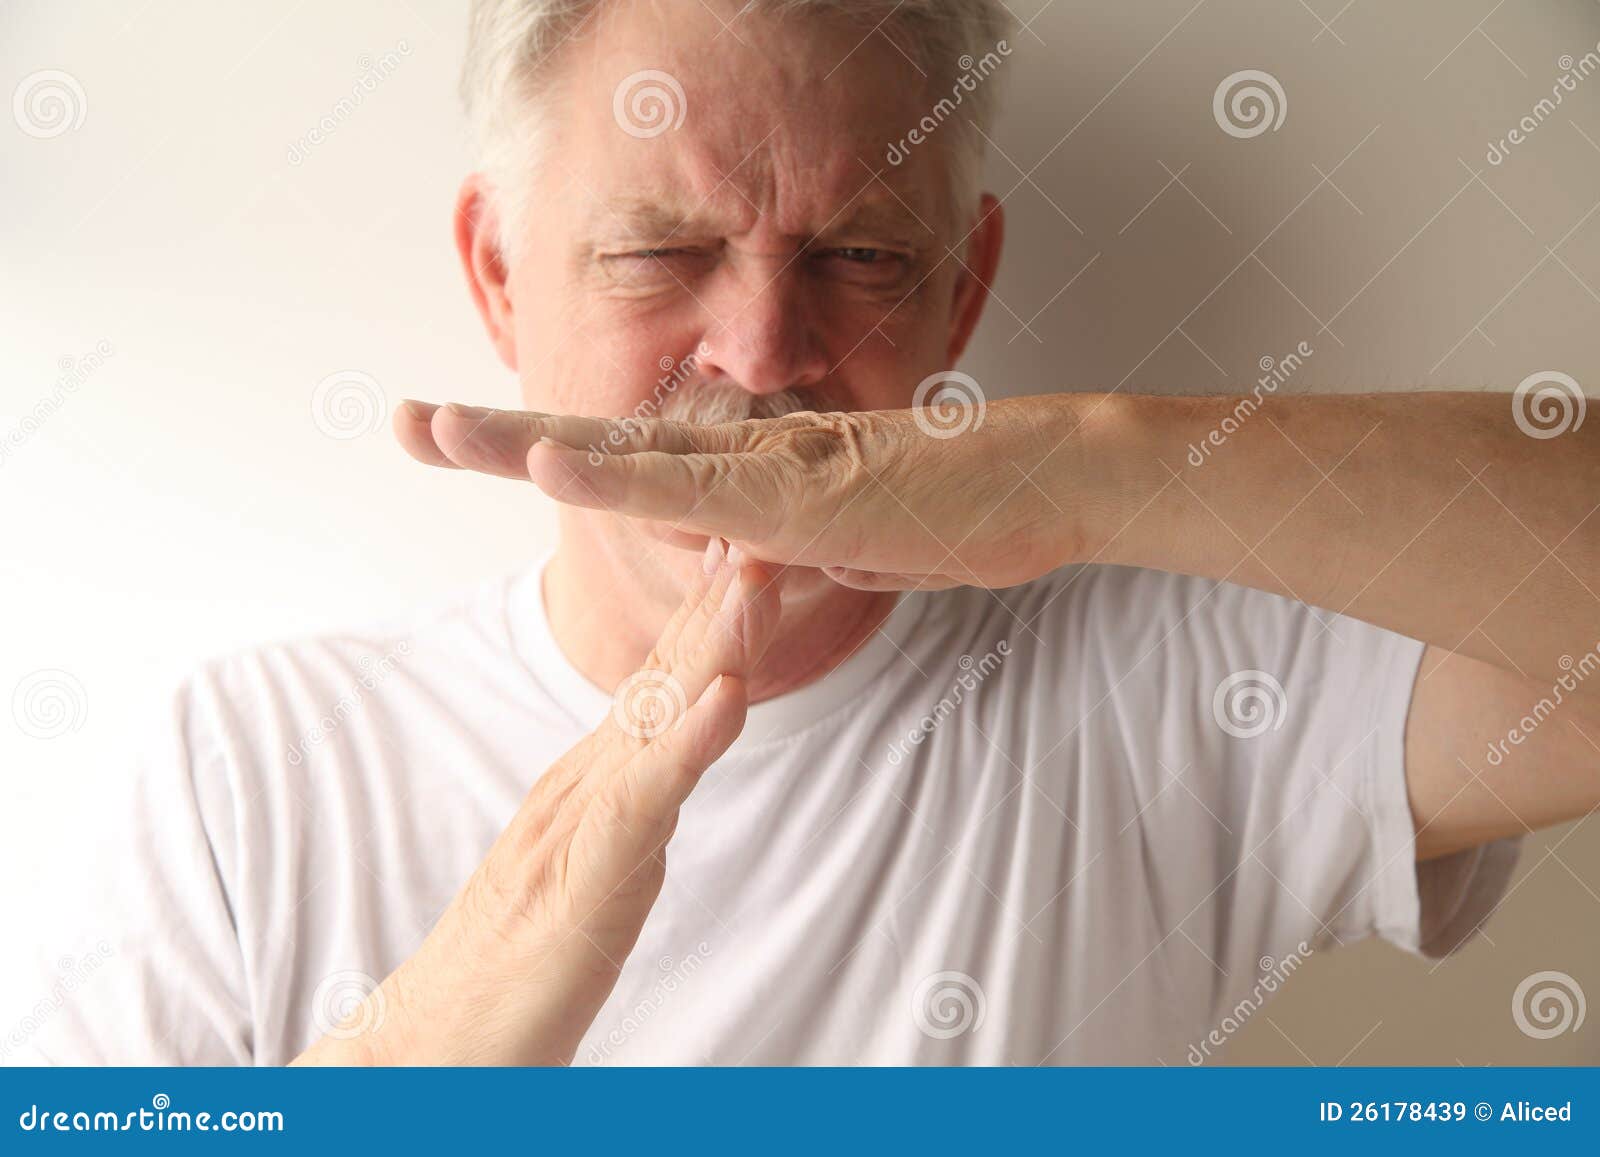 man uses timeout hand signal